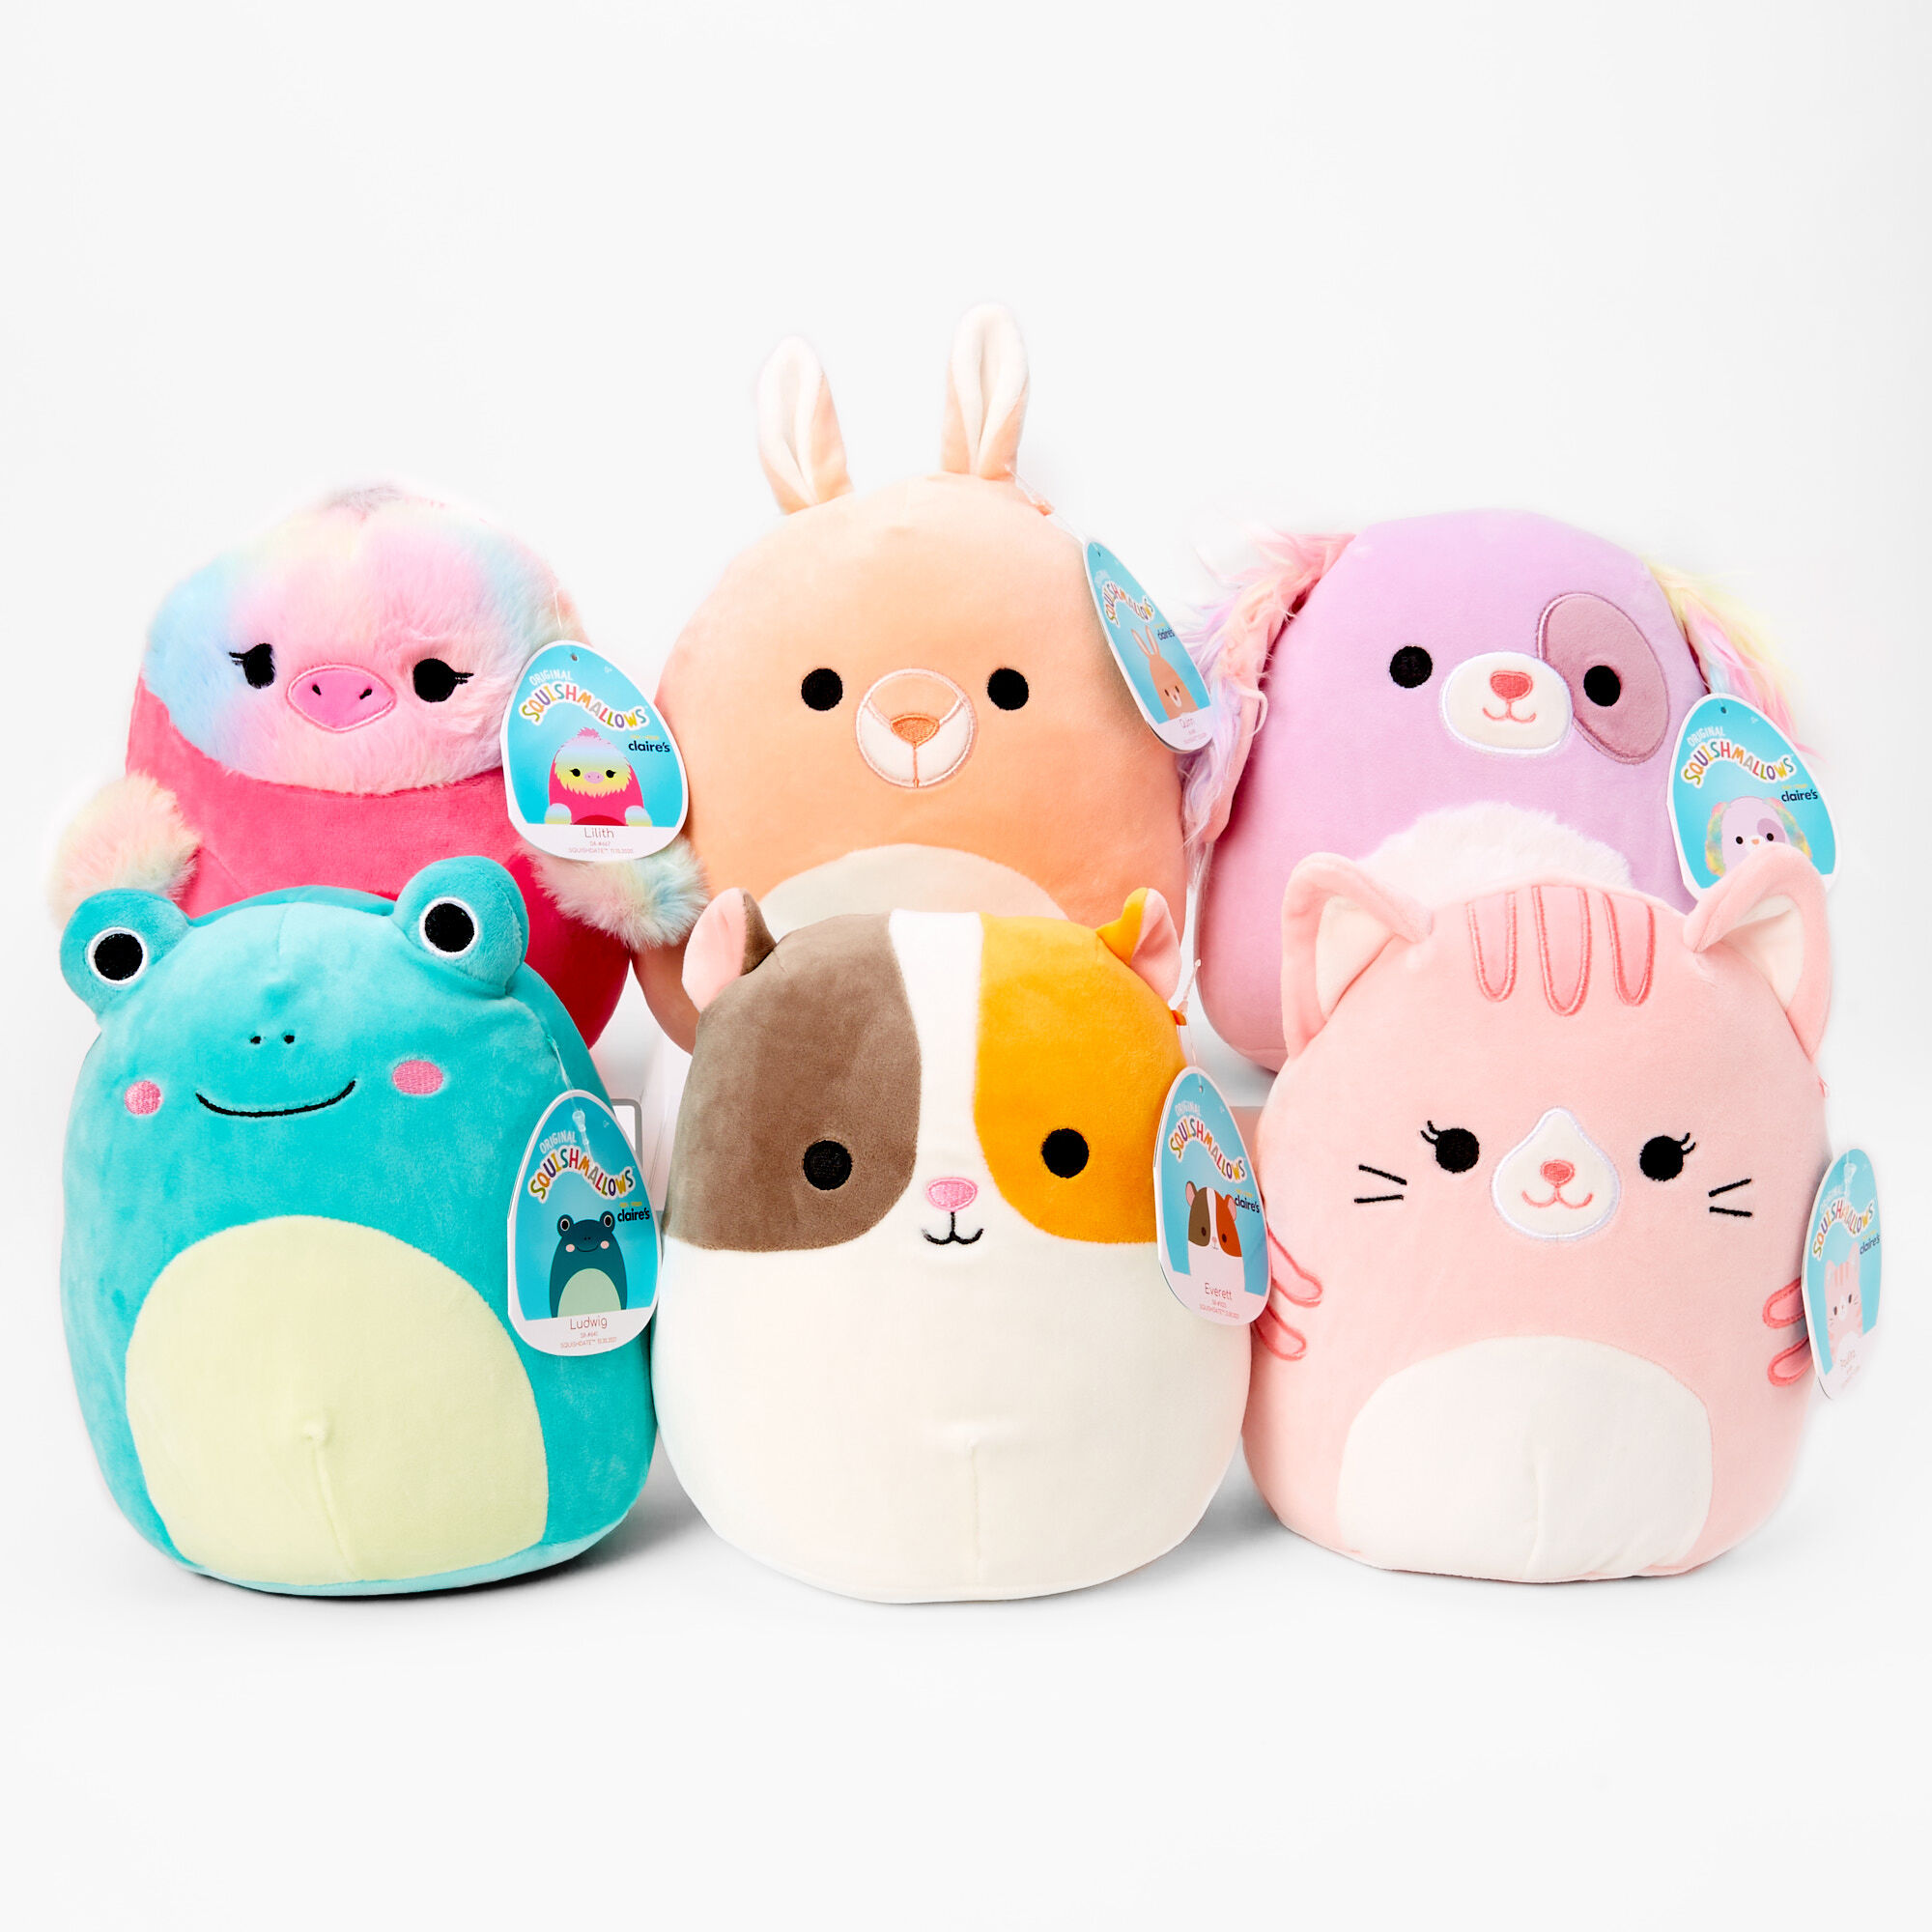 Head Back to Hogwarts with Harry Potter Squishmallows This Fall - The Toy  Insider